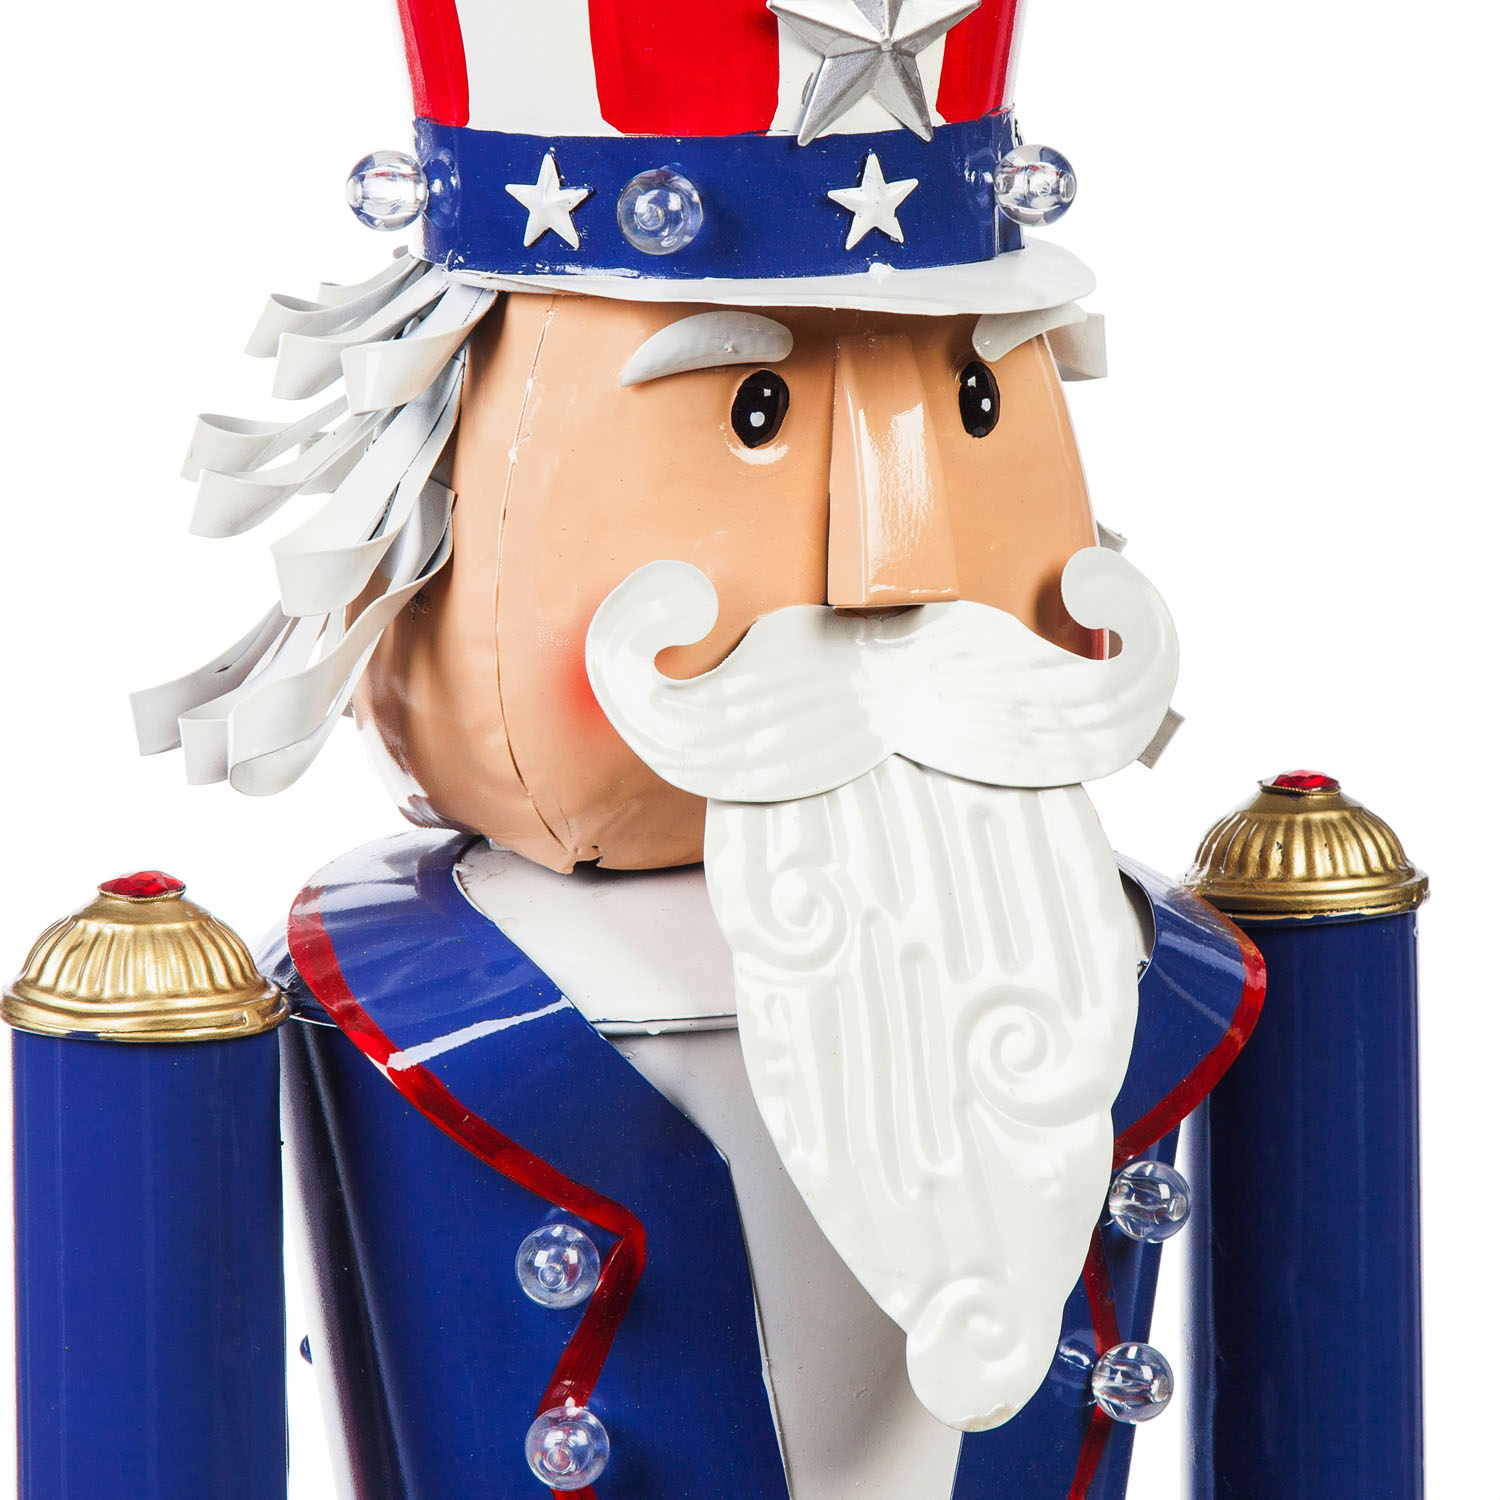 Evergreen 50"H Battery Operated Metal Uncle Sam Garden Statuary, 50.5'' x 9.9'' x 9.9'' inches - image 3 of 3